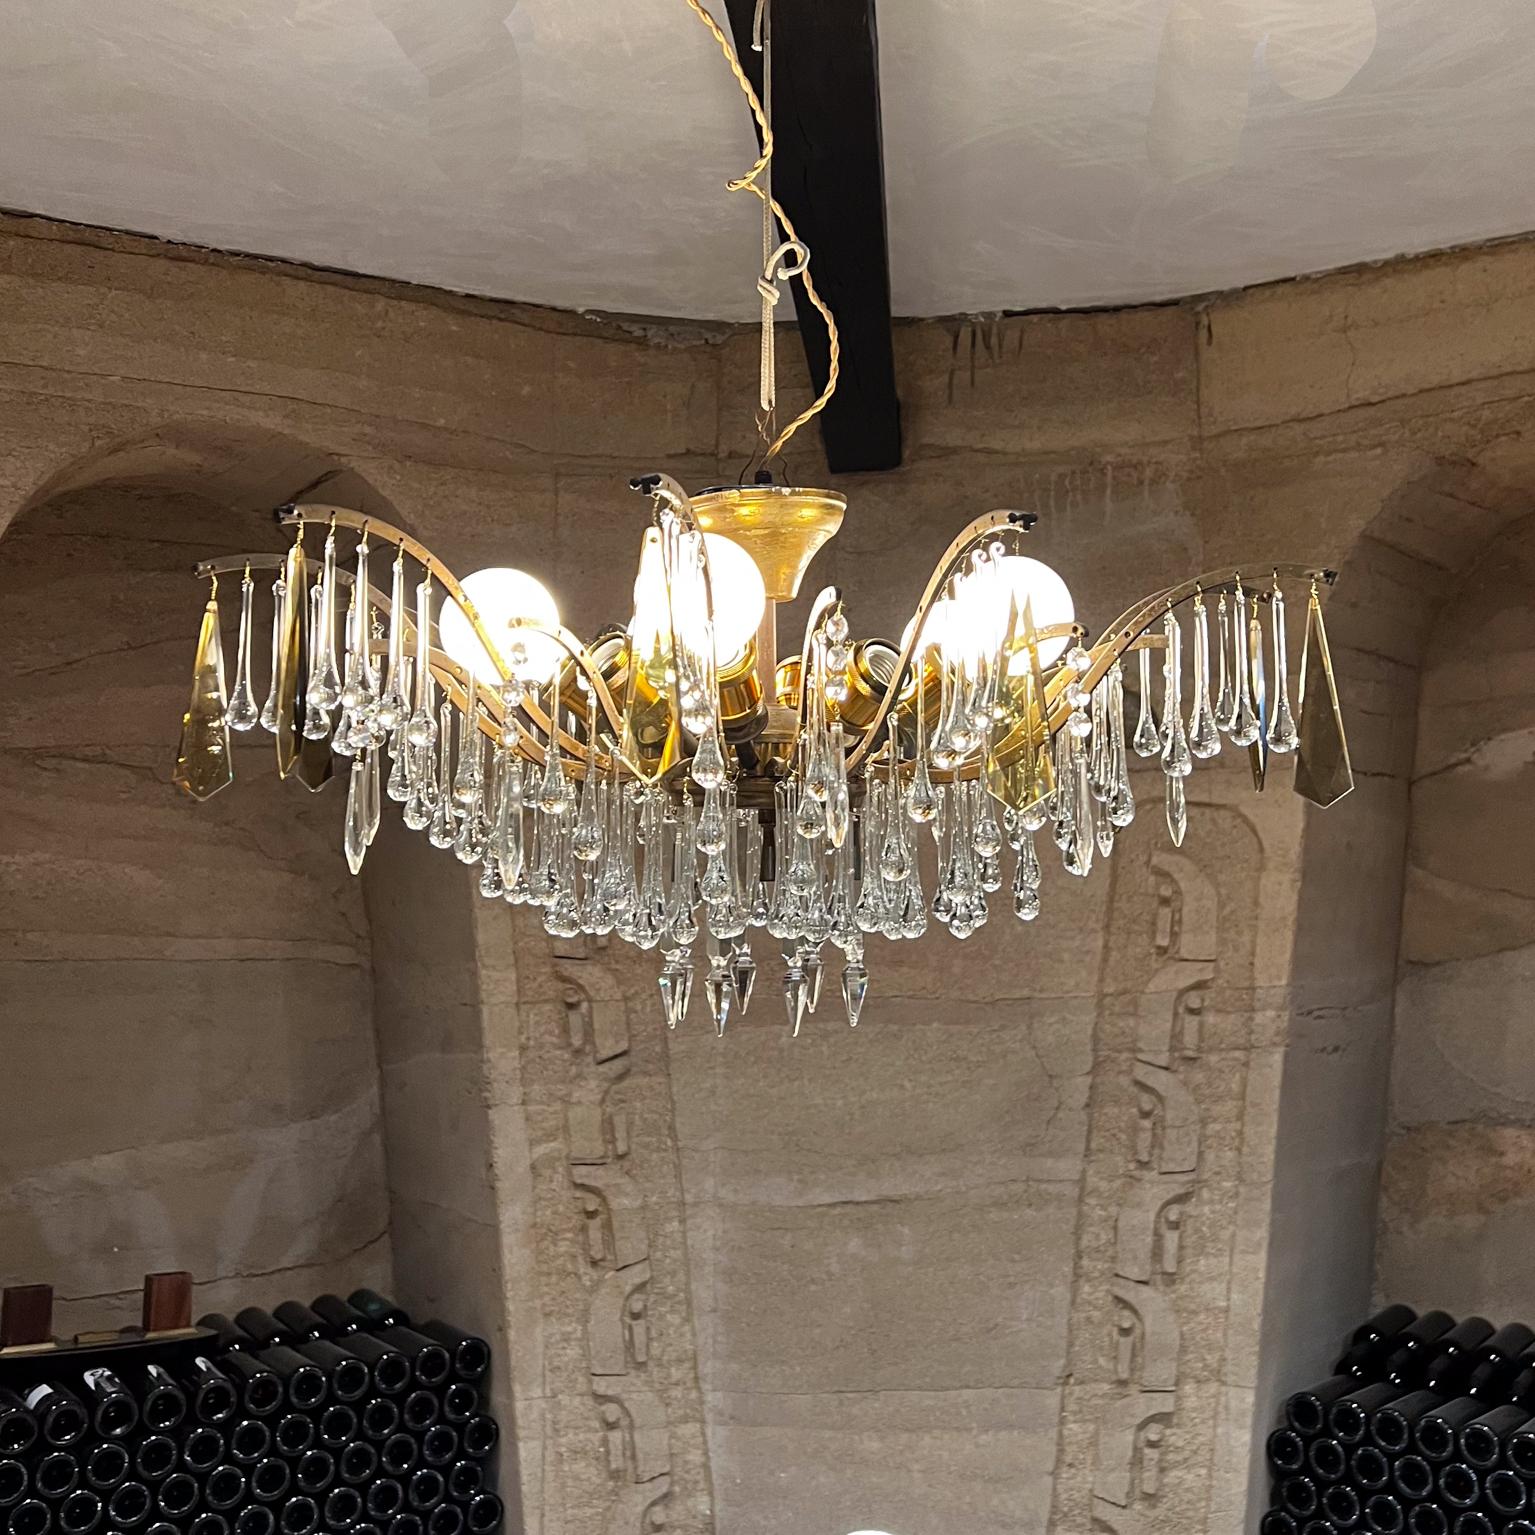 1950s Luxurious Murano Teardrop Crystal and Bronze Chandelier
Ten light design
Unmarked
15 tall x 32 diameter
Rewired. New sockets.
It requires 10 bulbs which are not included.
Original preowned condition.
Refer to images provided.
